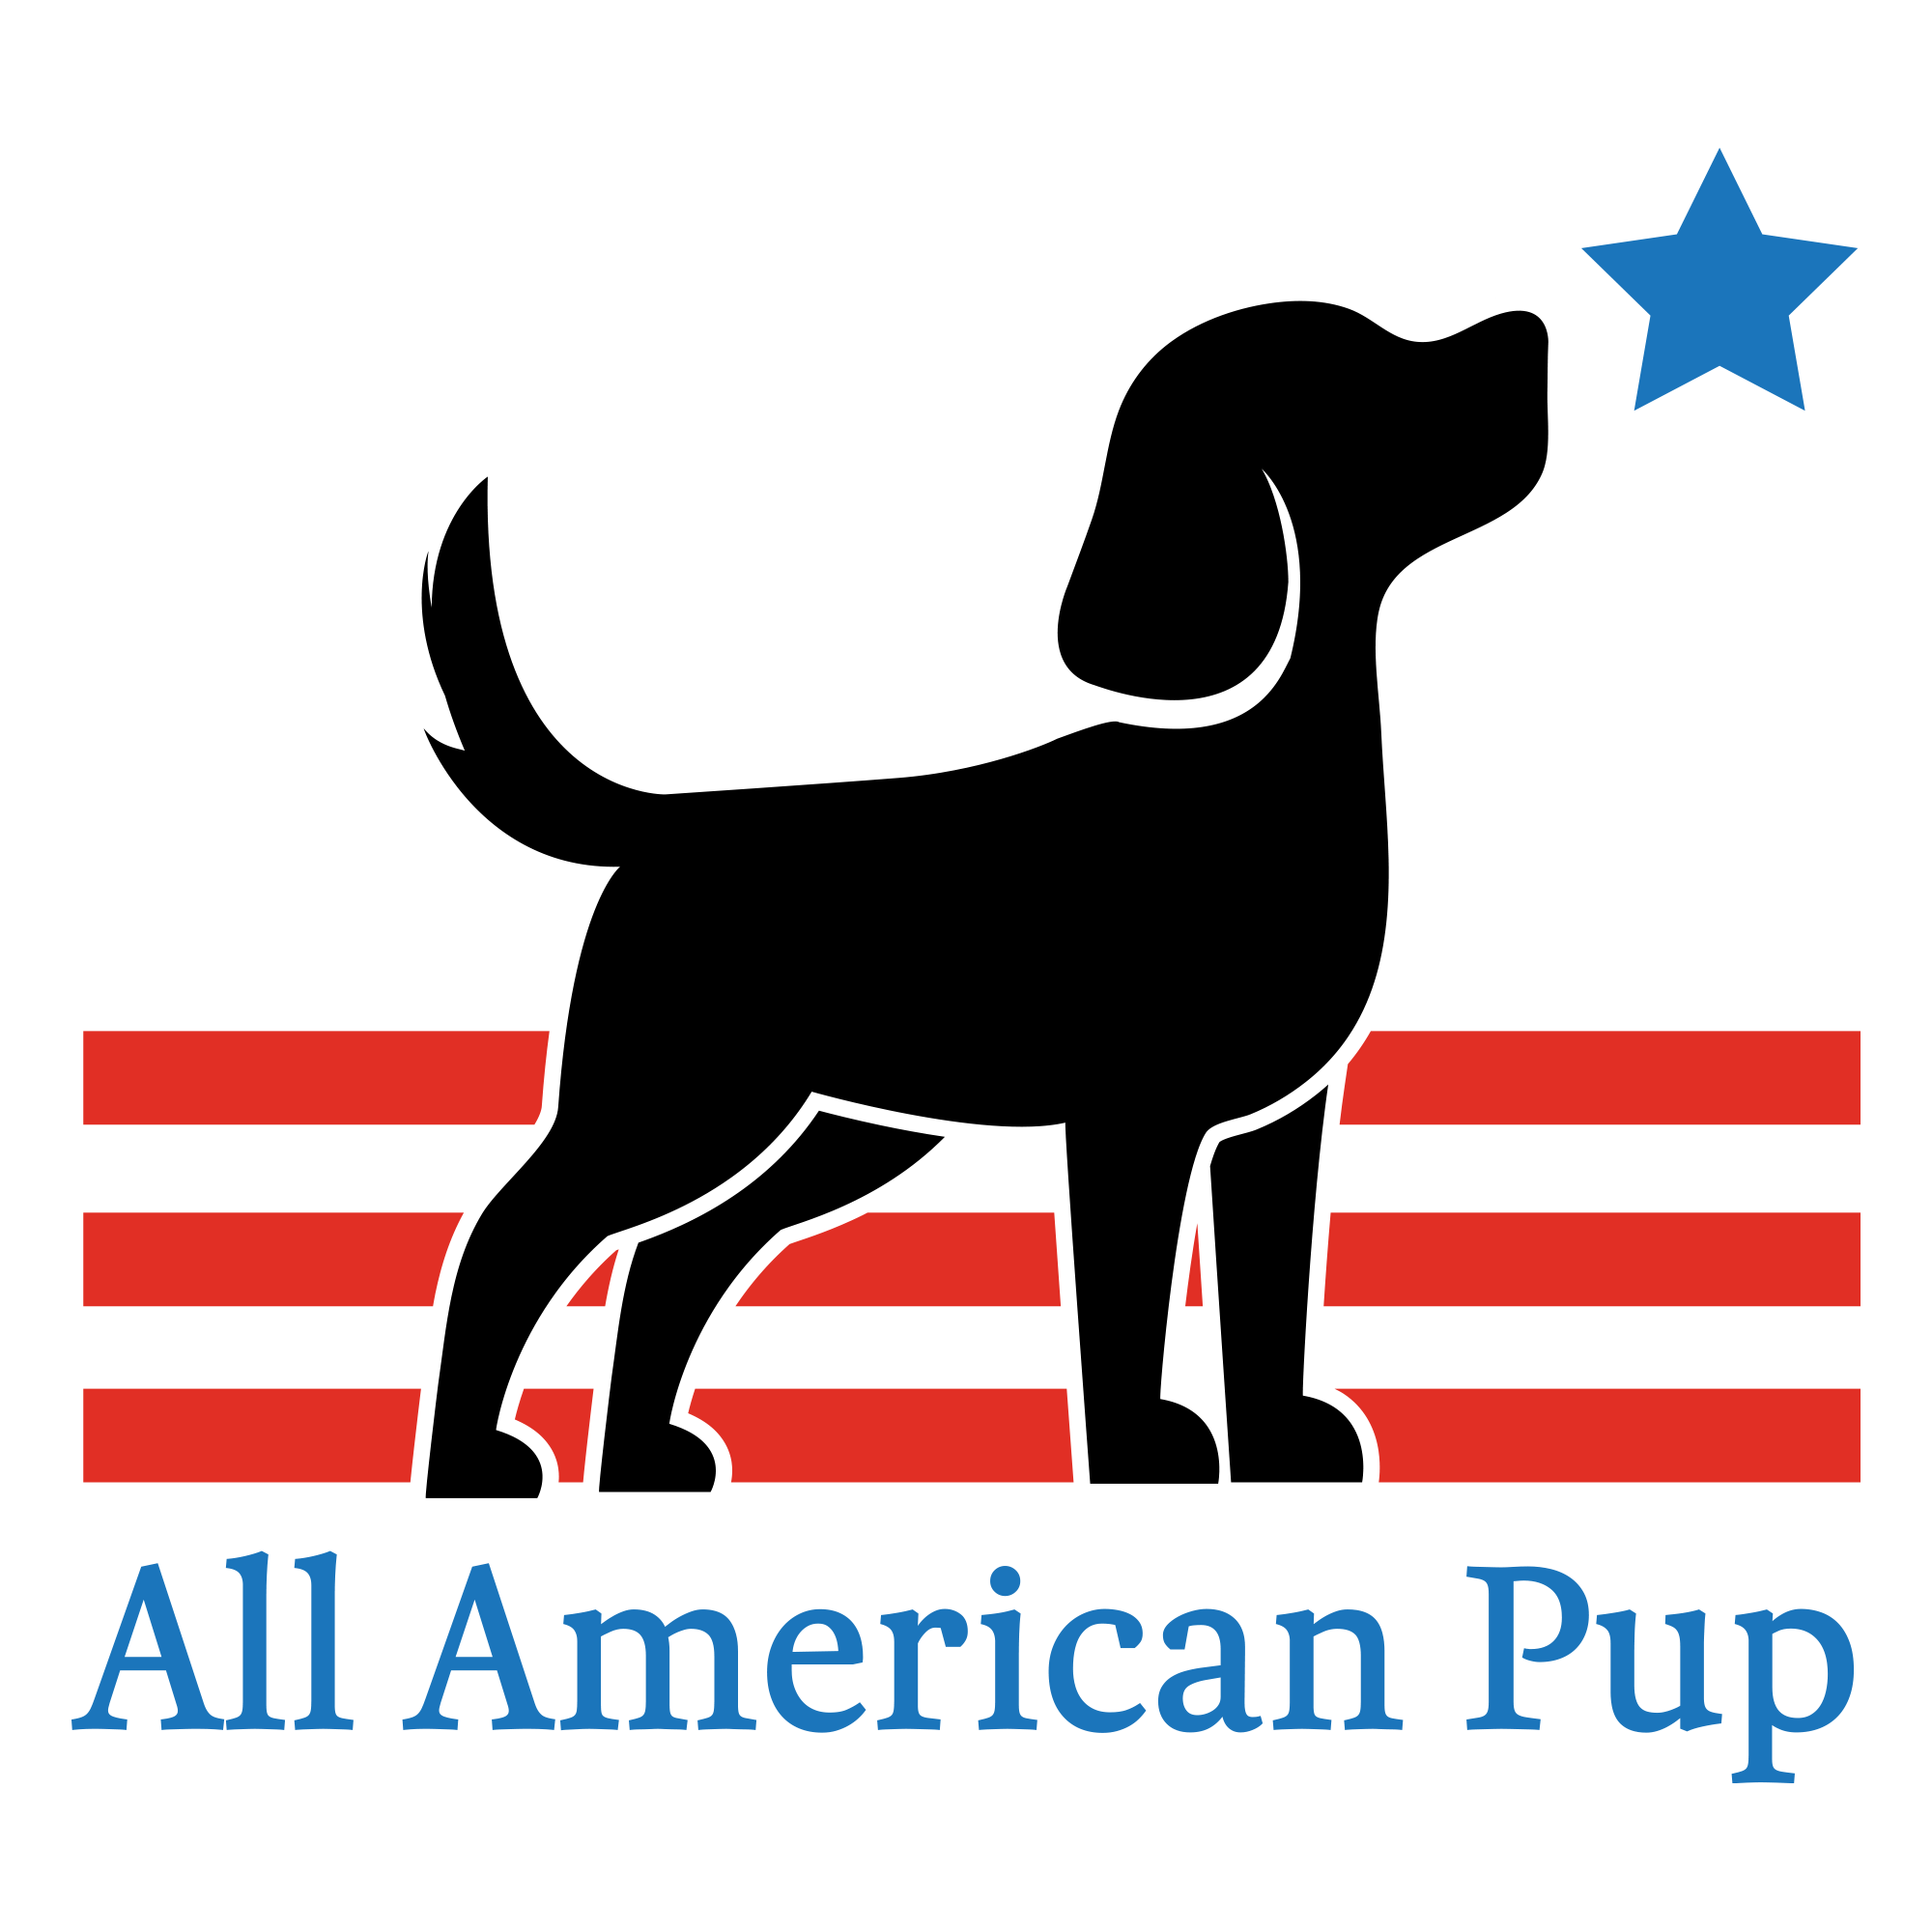 All American Pup